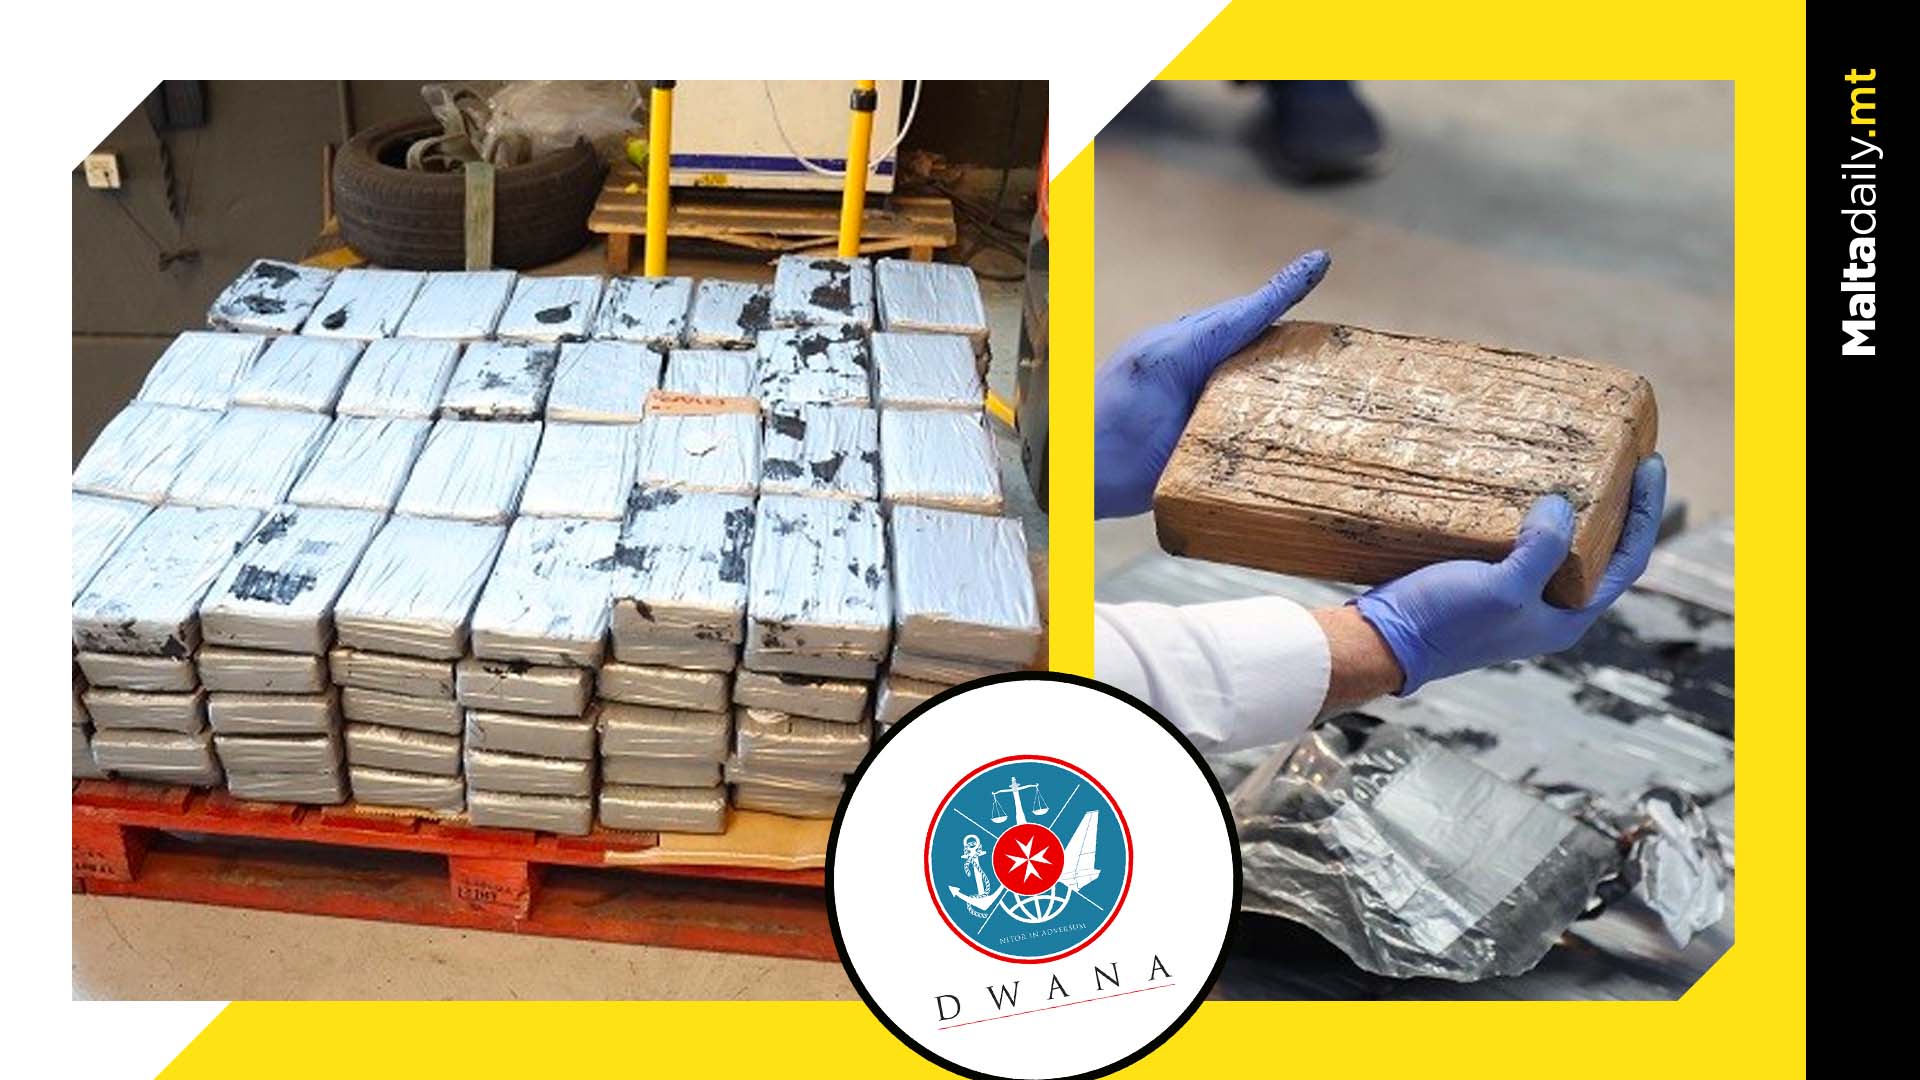 270kg of cocaine hidden in banana containers intercepted